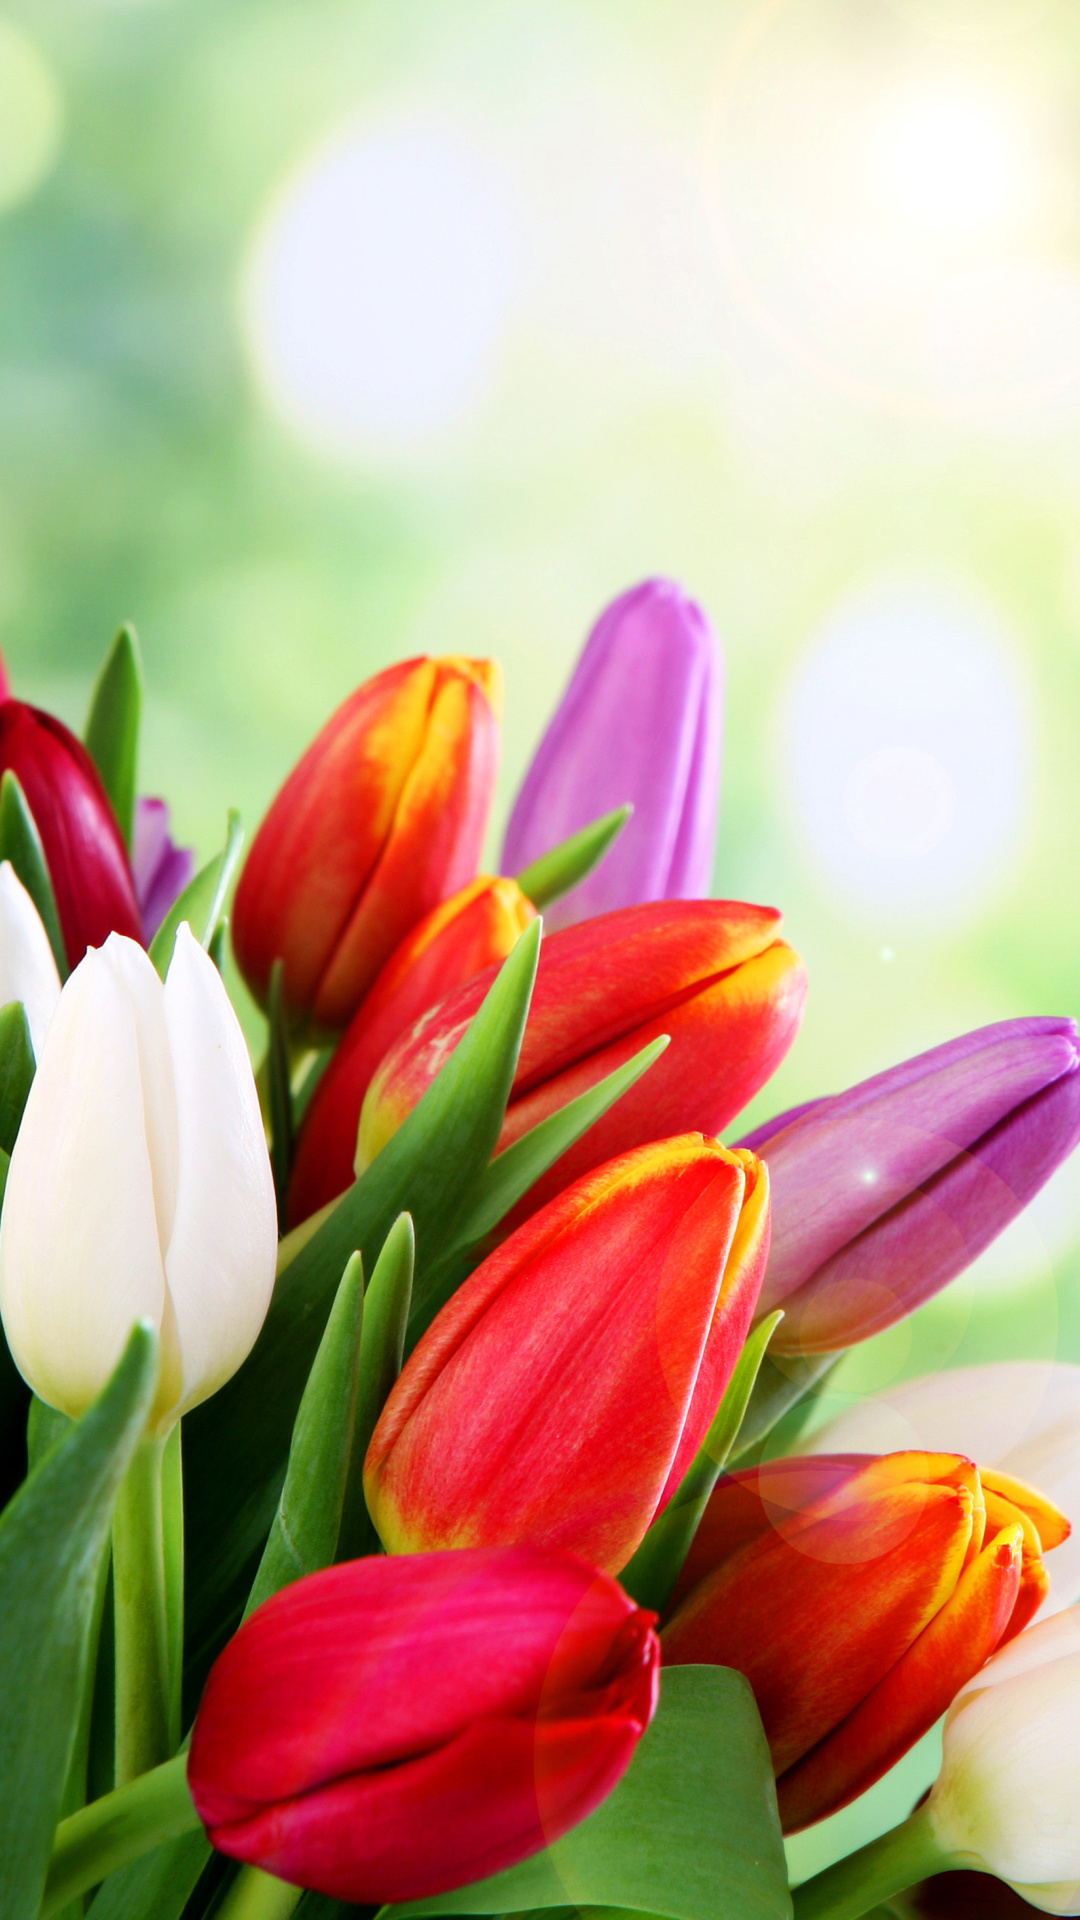 Das Bouquet of colorful tulips Wallpaper 1080x1920